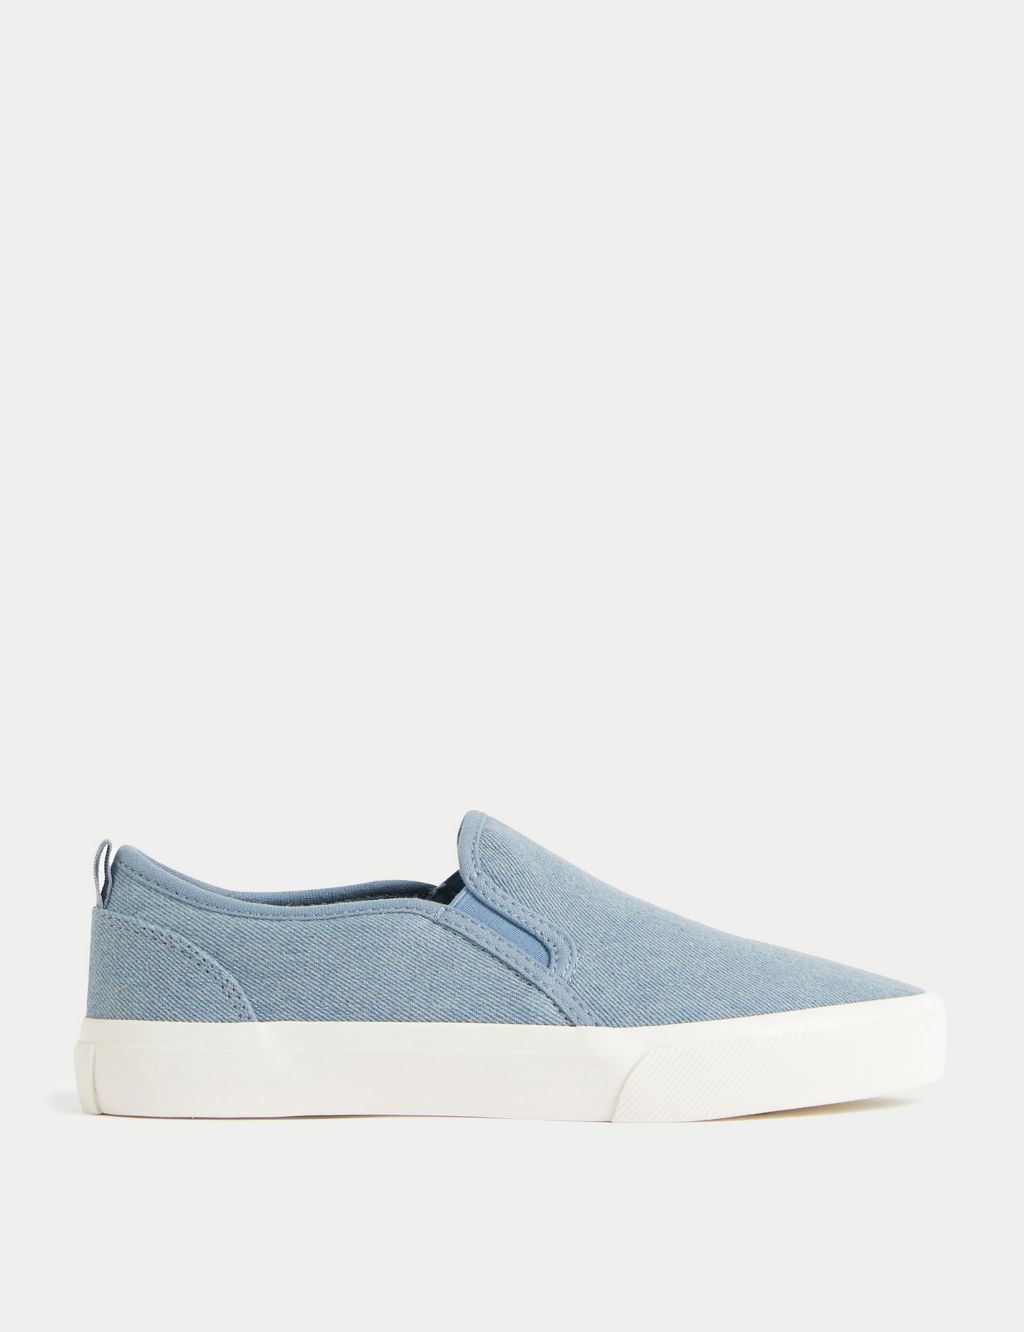 Canvas Slip On Trainers image 1